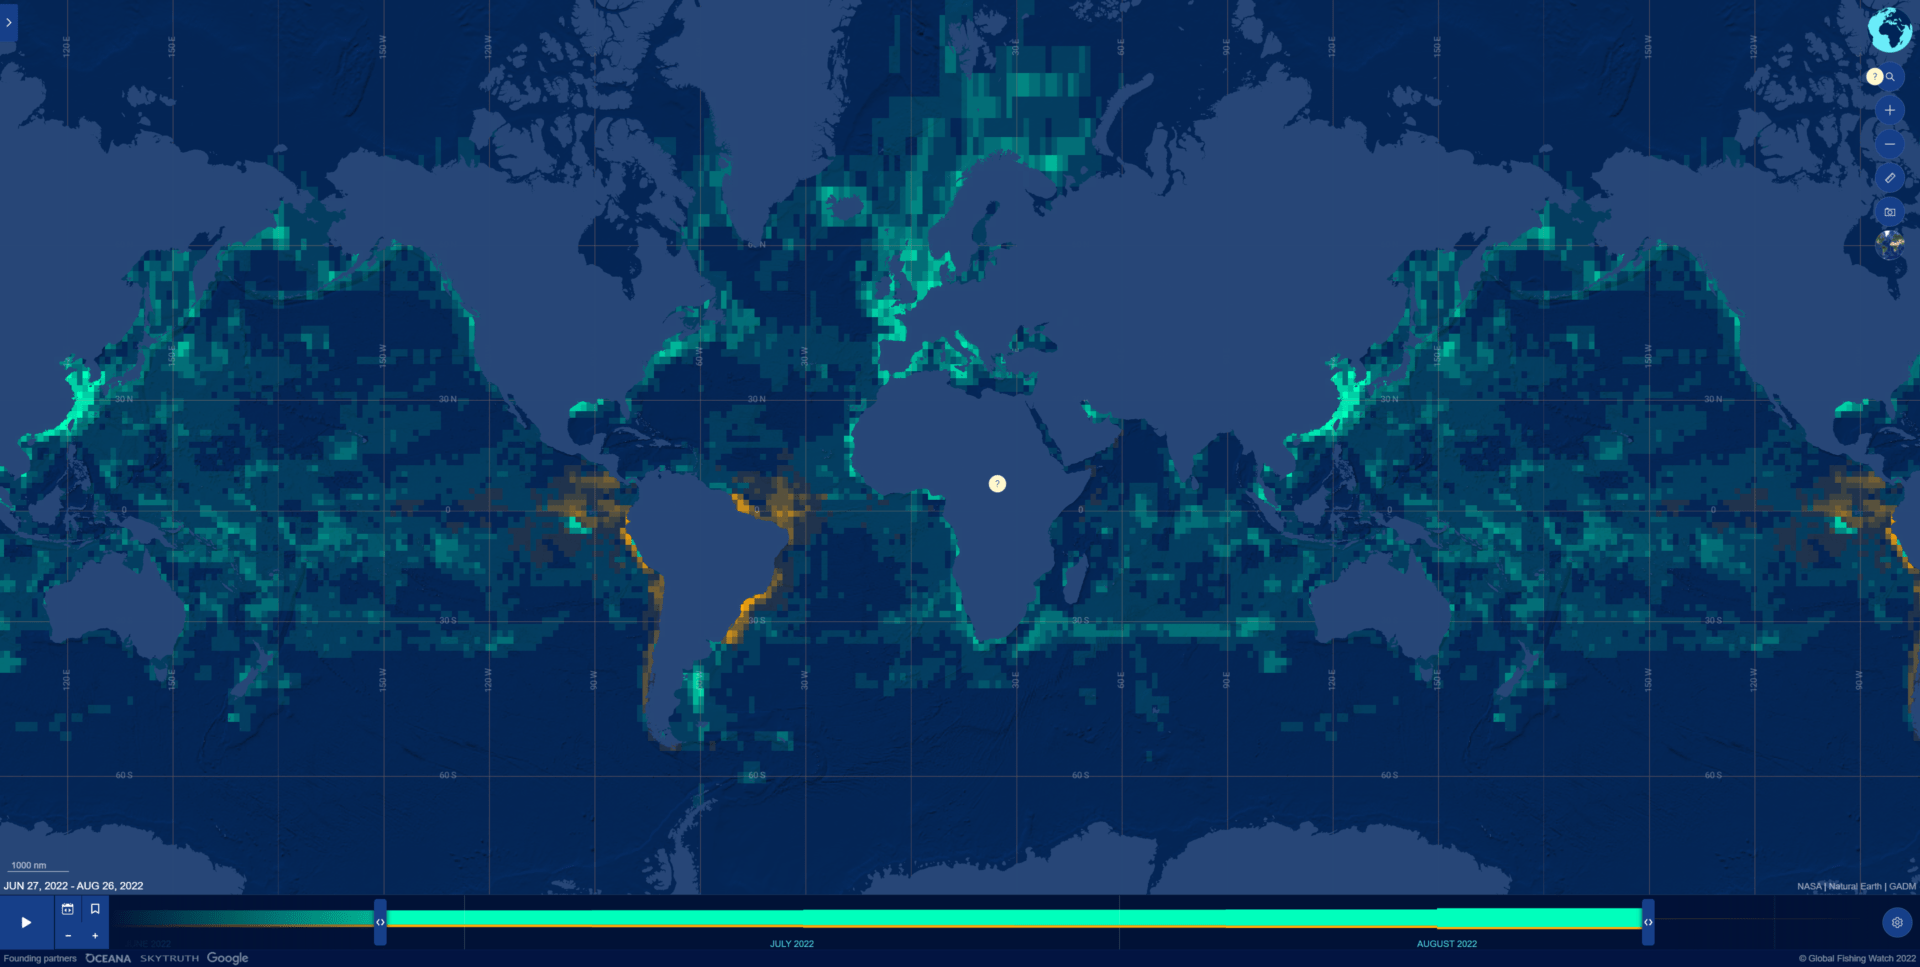 Global Fishing Watch using smart ocean technology to detect illegal fishing activity